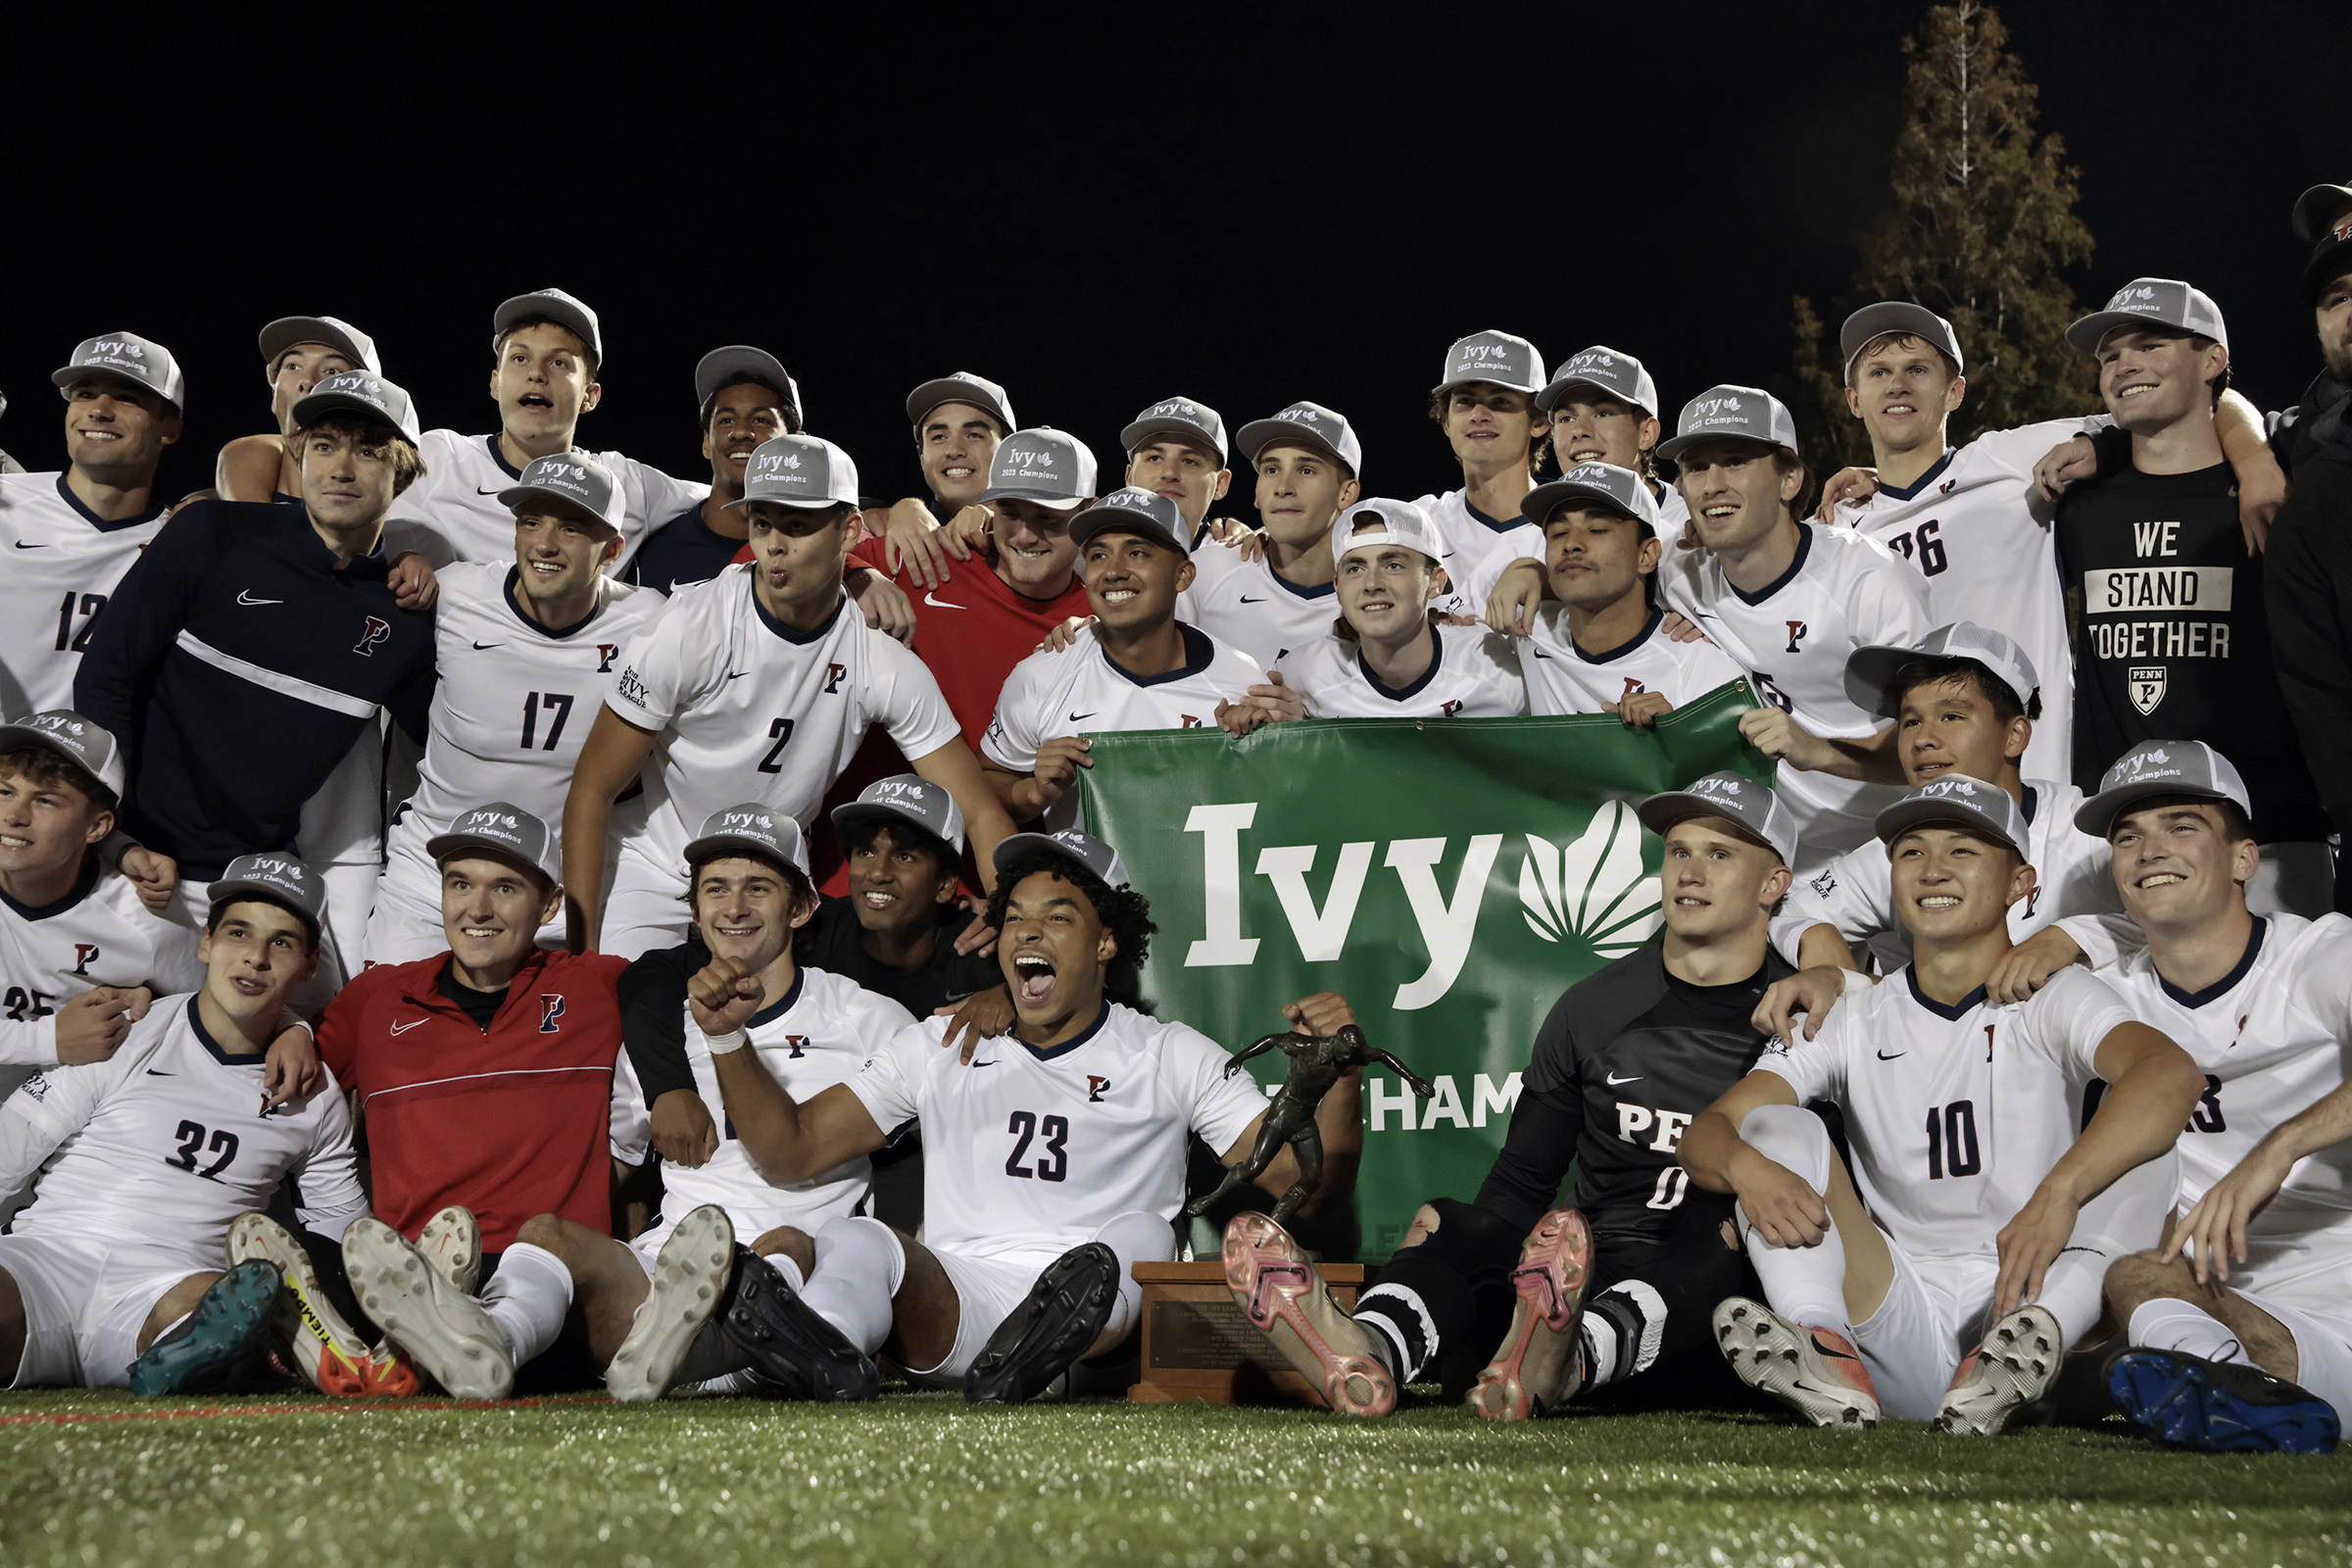 Men's soccer heads to Ivy Championship after upsetting Penn in